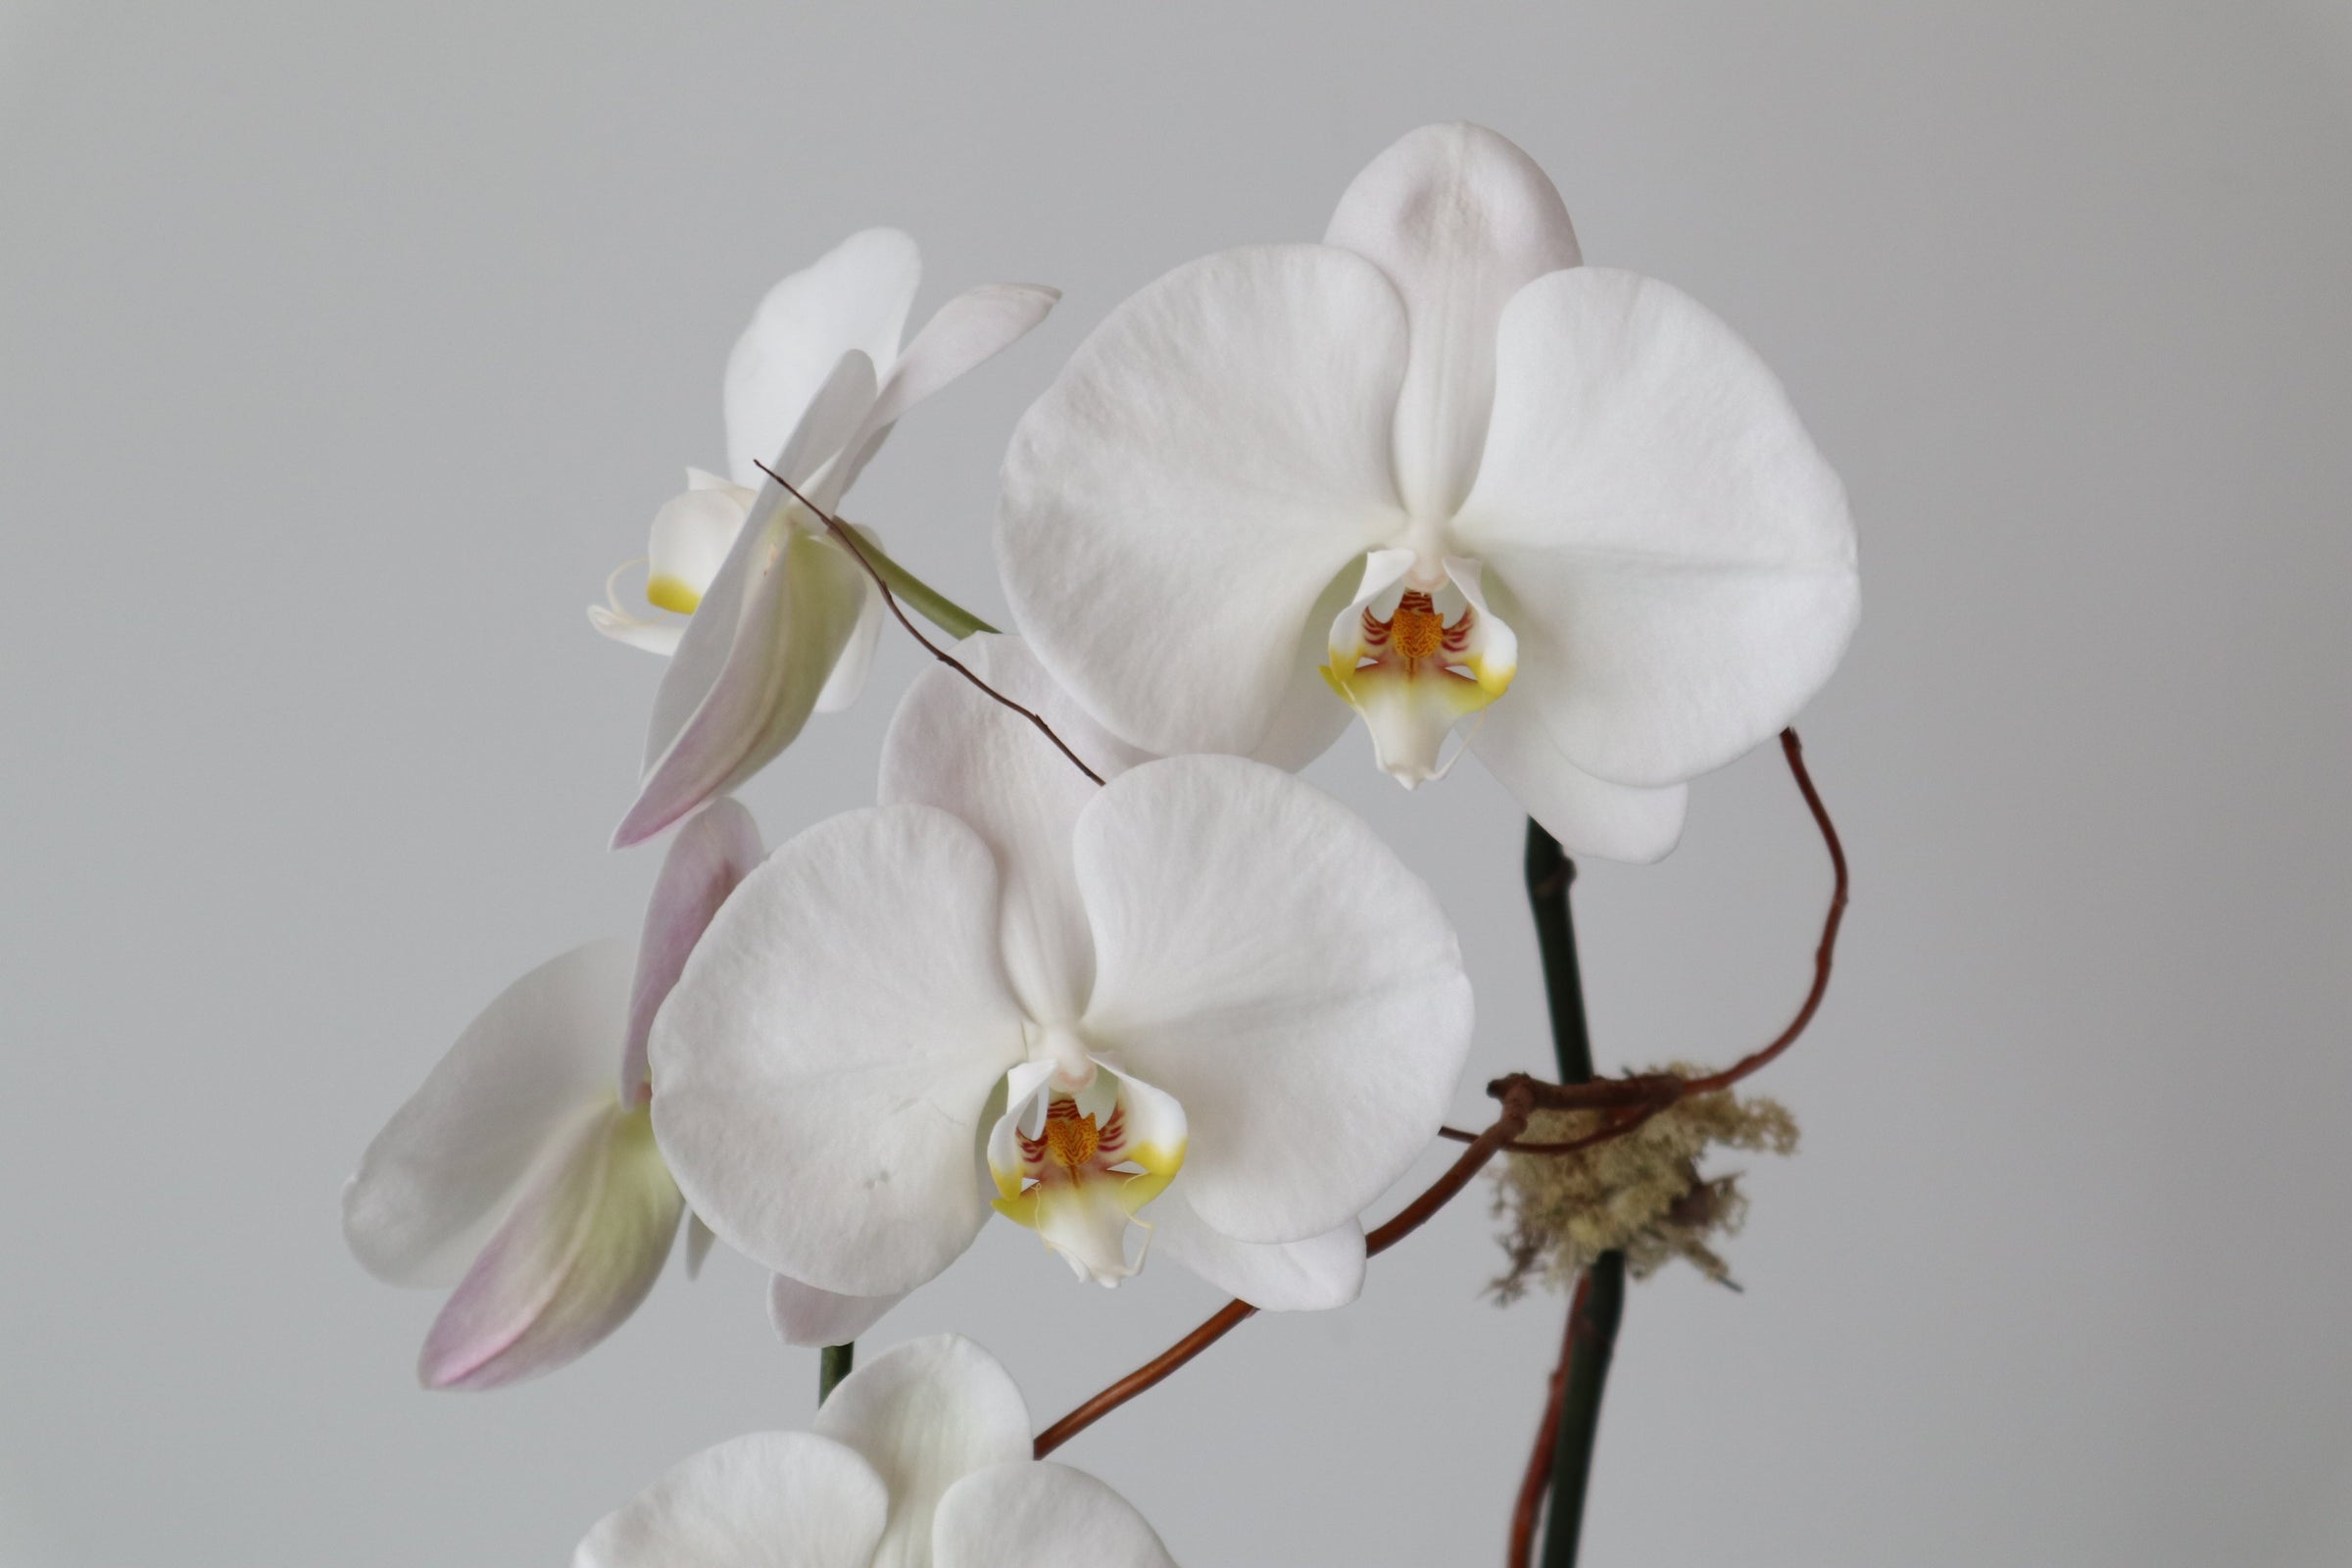 Orchid close up photos in white